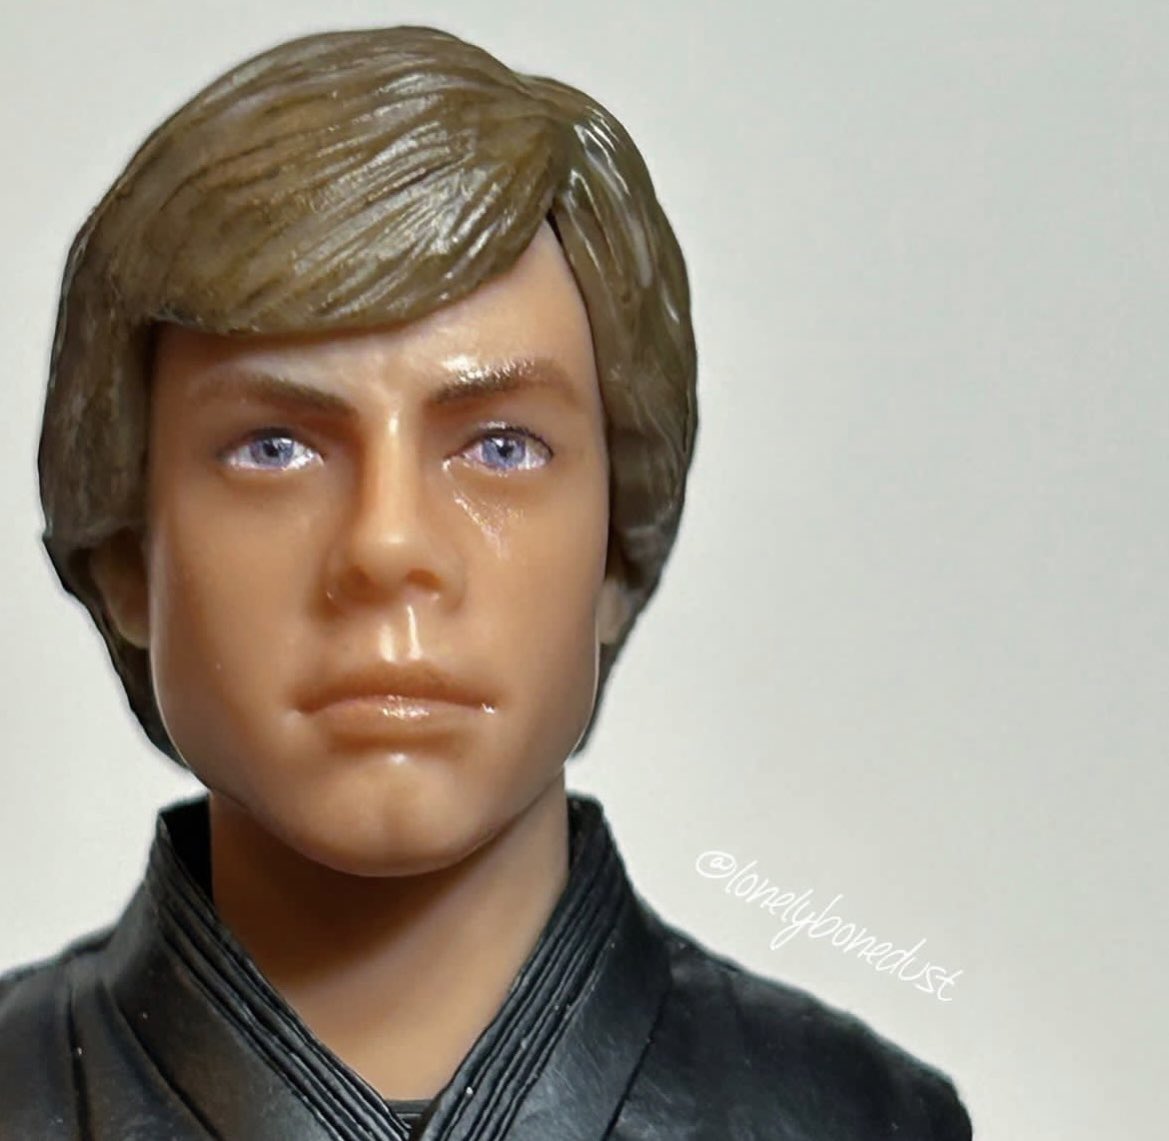 #toycollector #toycollection #actionfigures #actionfigurecollector #actionfigurecollection #starwars #toyphotography #lukeskywalker #actionfigurephotography